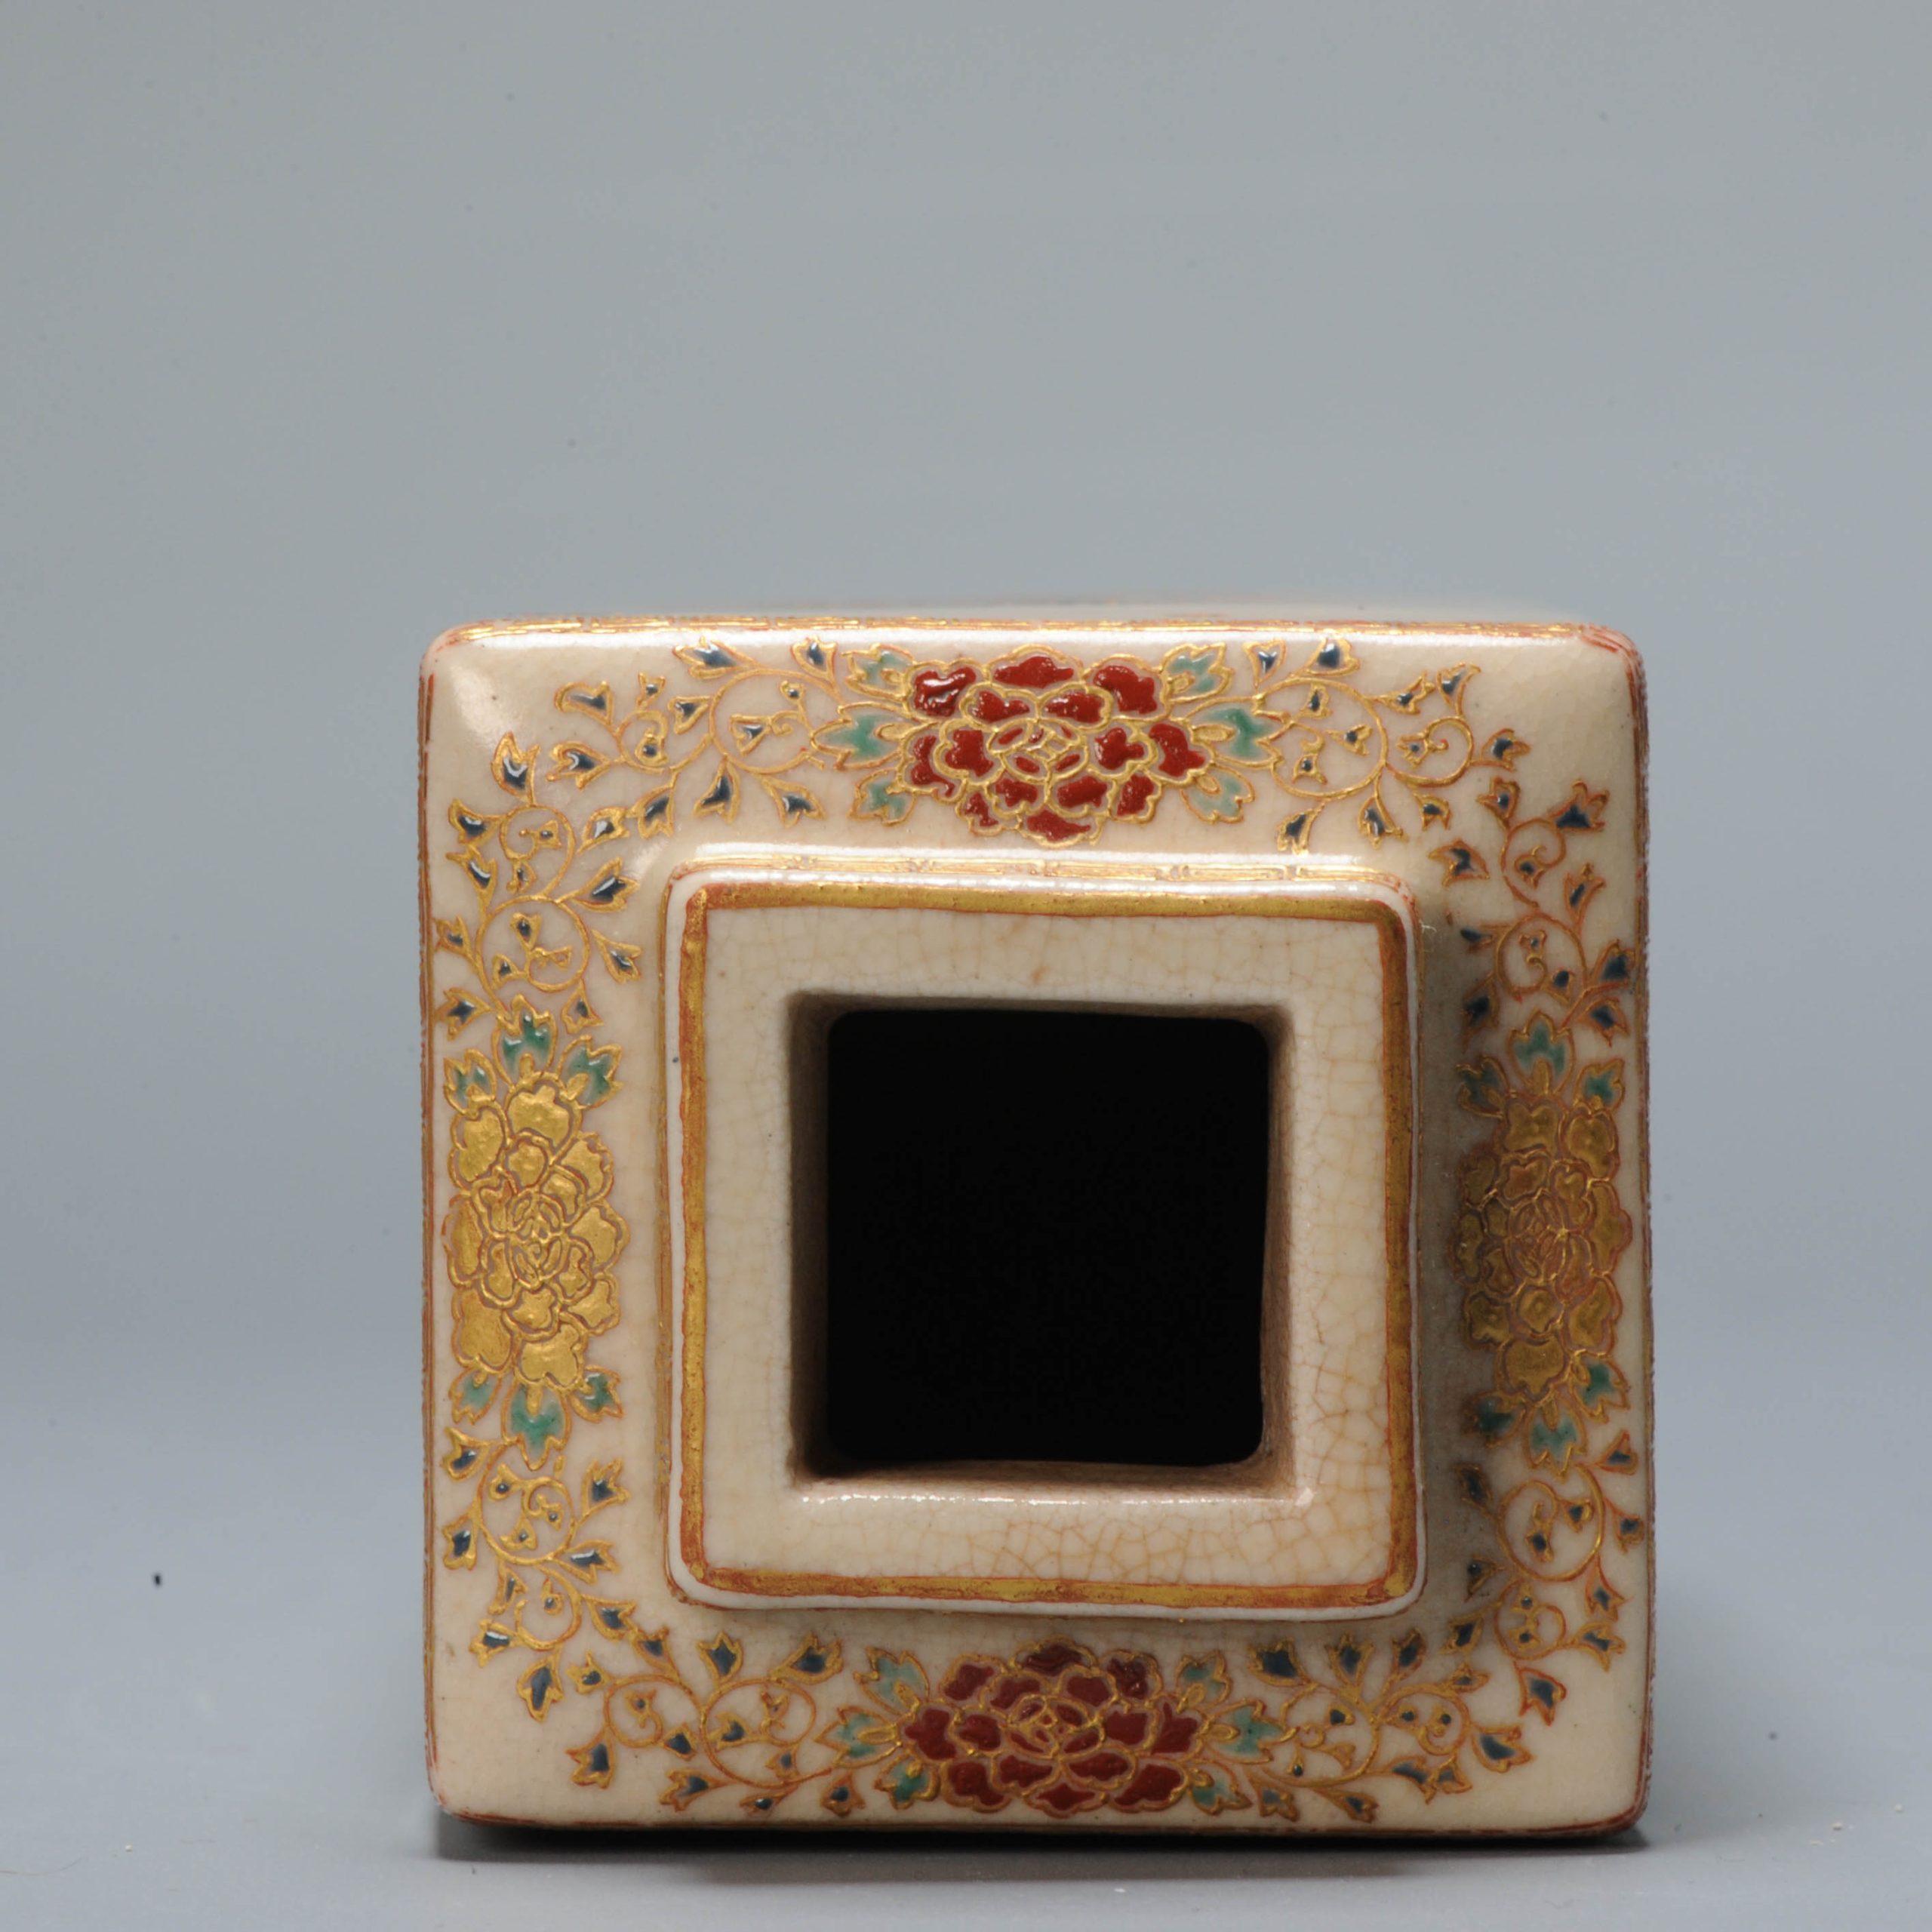 Antique Meiji Period Japanese Square Satsuma Vase Floral Decoration Marked In Good Condition For Sale In Amsterdam, Noord Holland